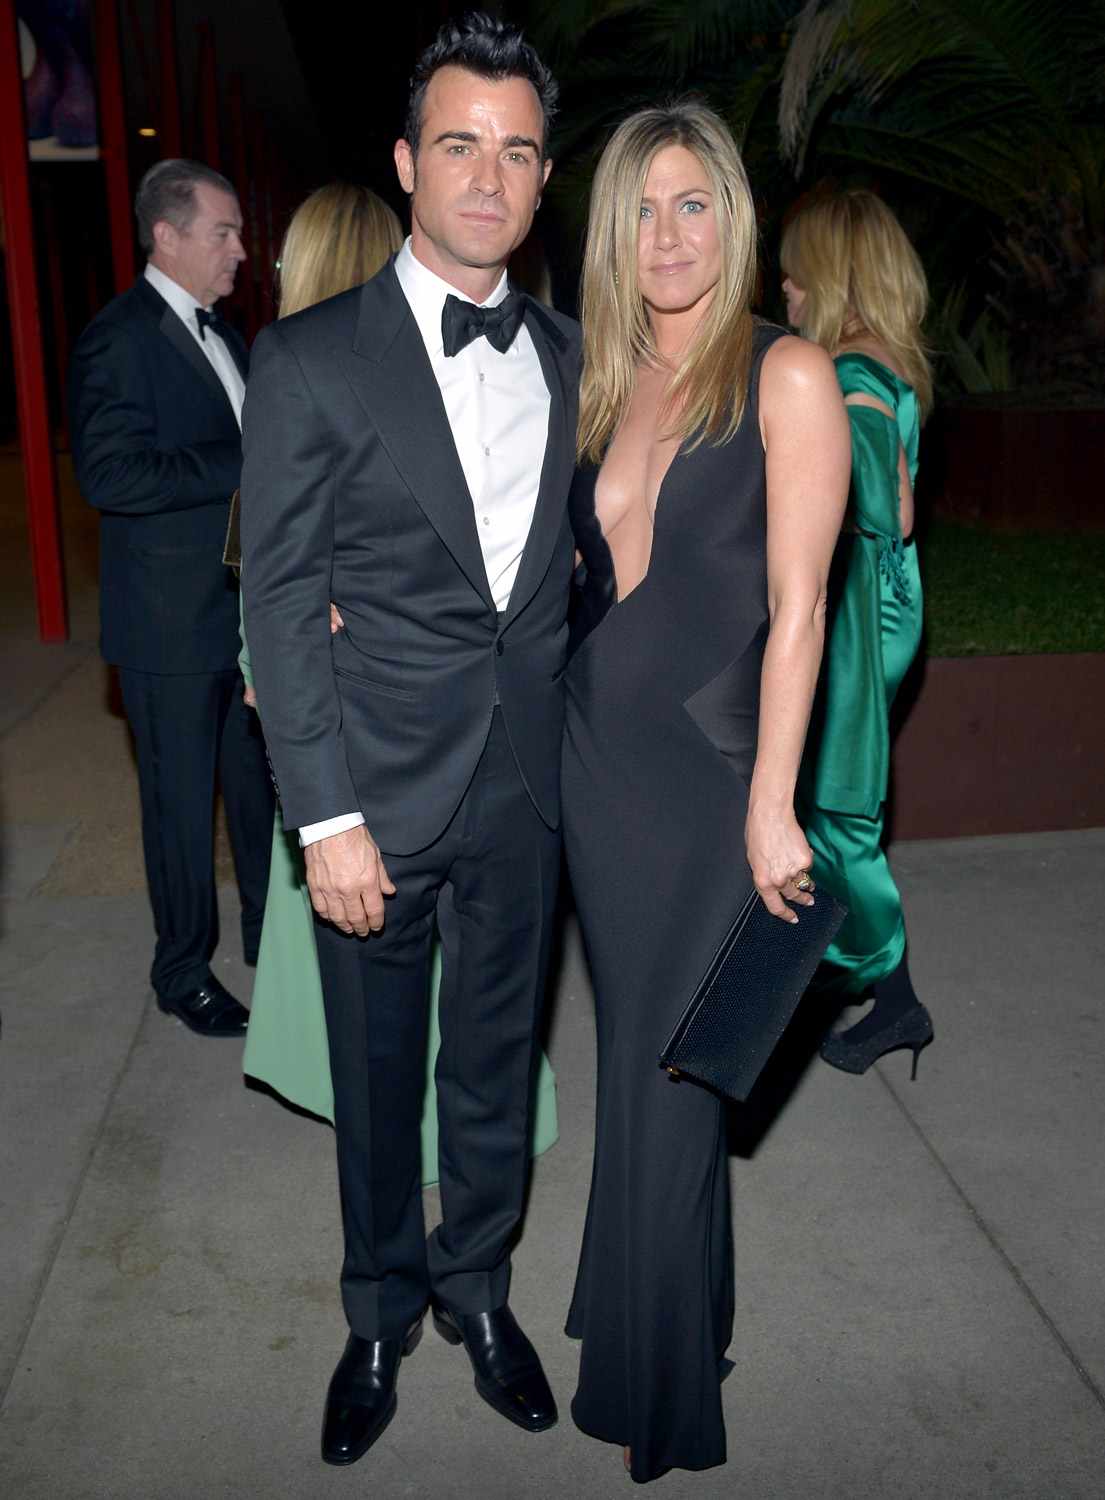 Hot or Not: Jennifer Aniston &#038; Justin Theroux in Tom Ford?